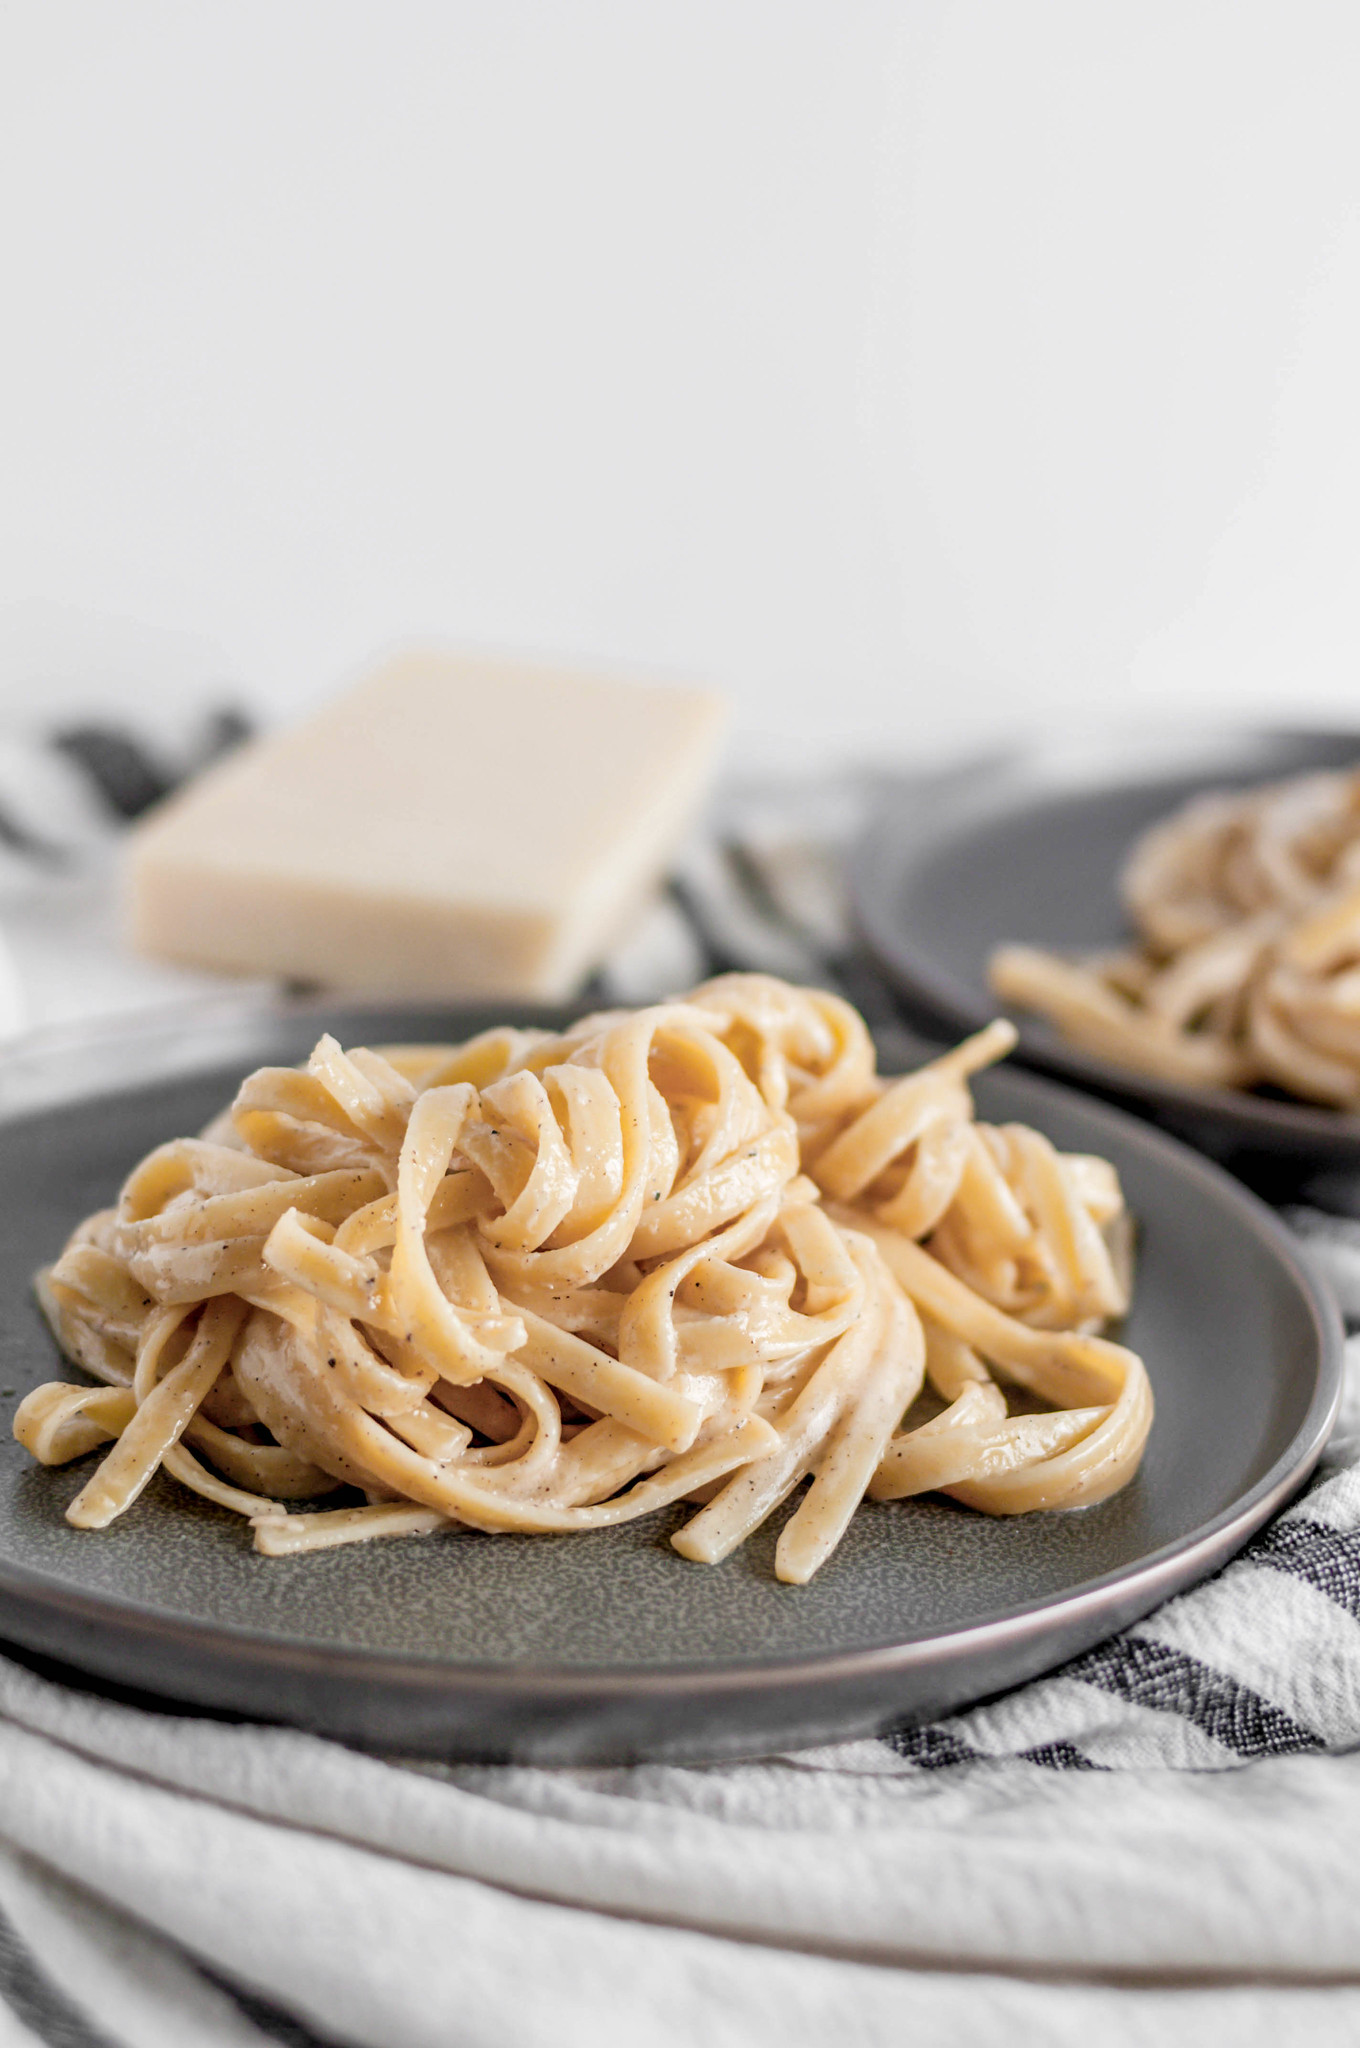 Roasted Garlic Alfredo will quickly become your go to weeknight meal. Garlicky, cheesy, nutty and done in less than 30 minutes.